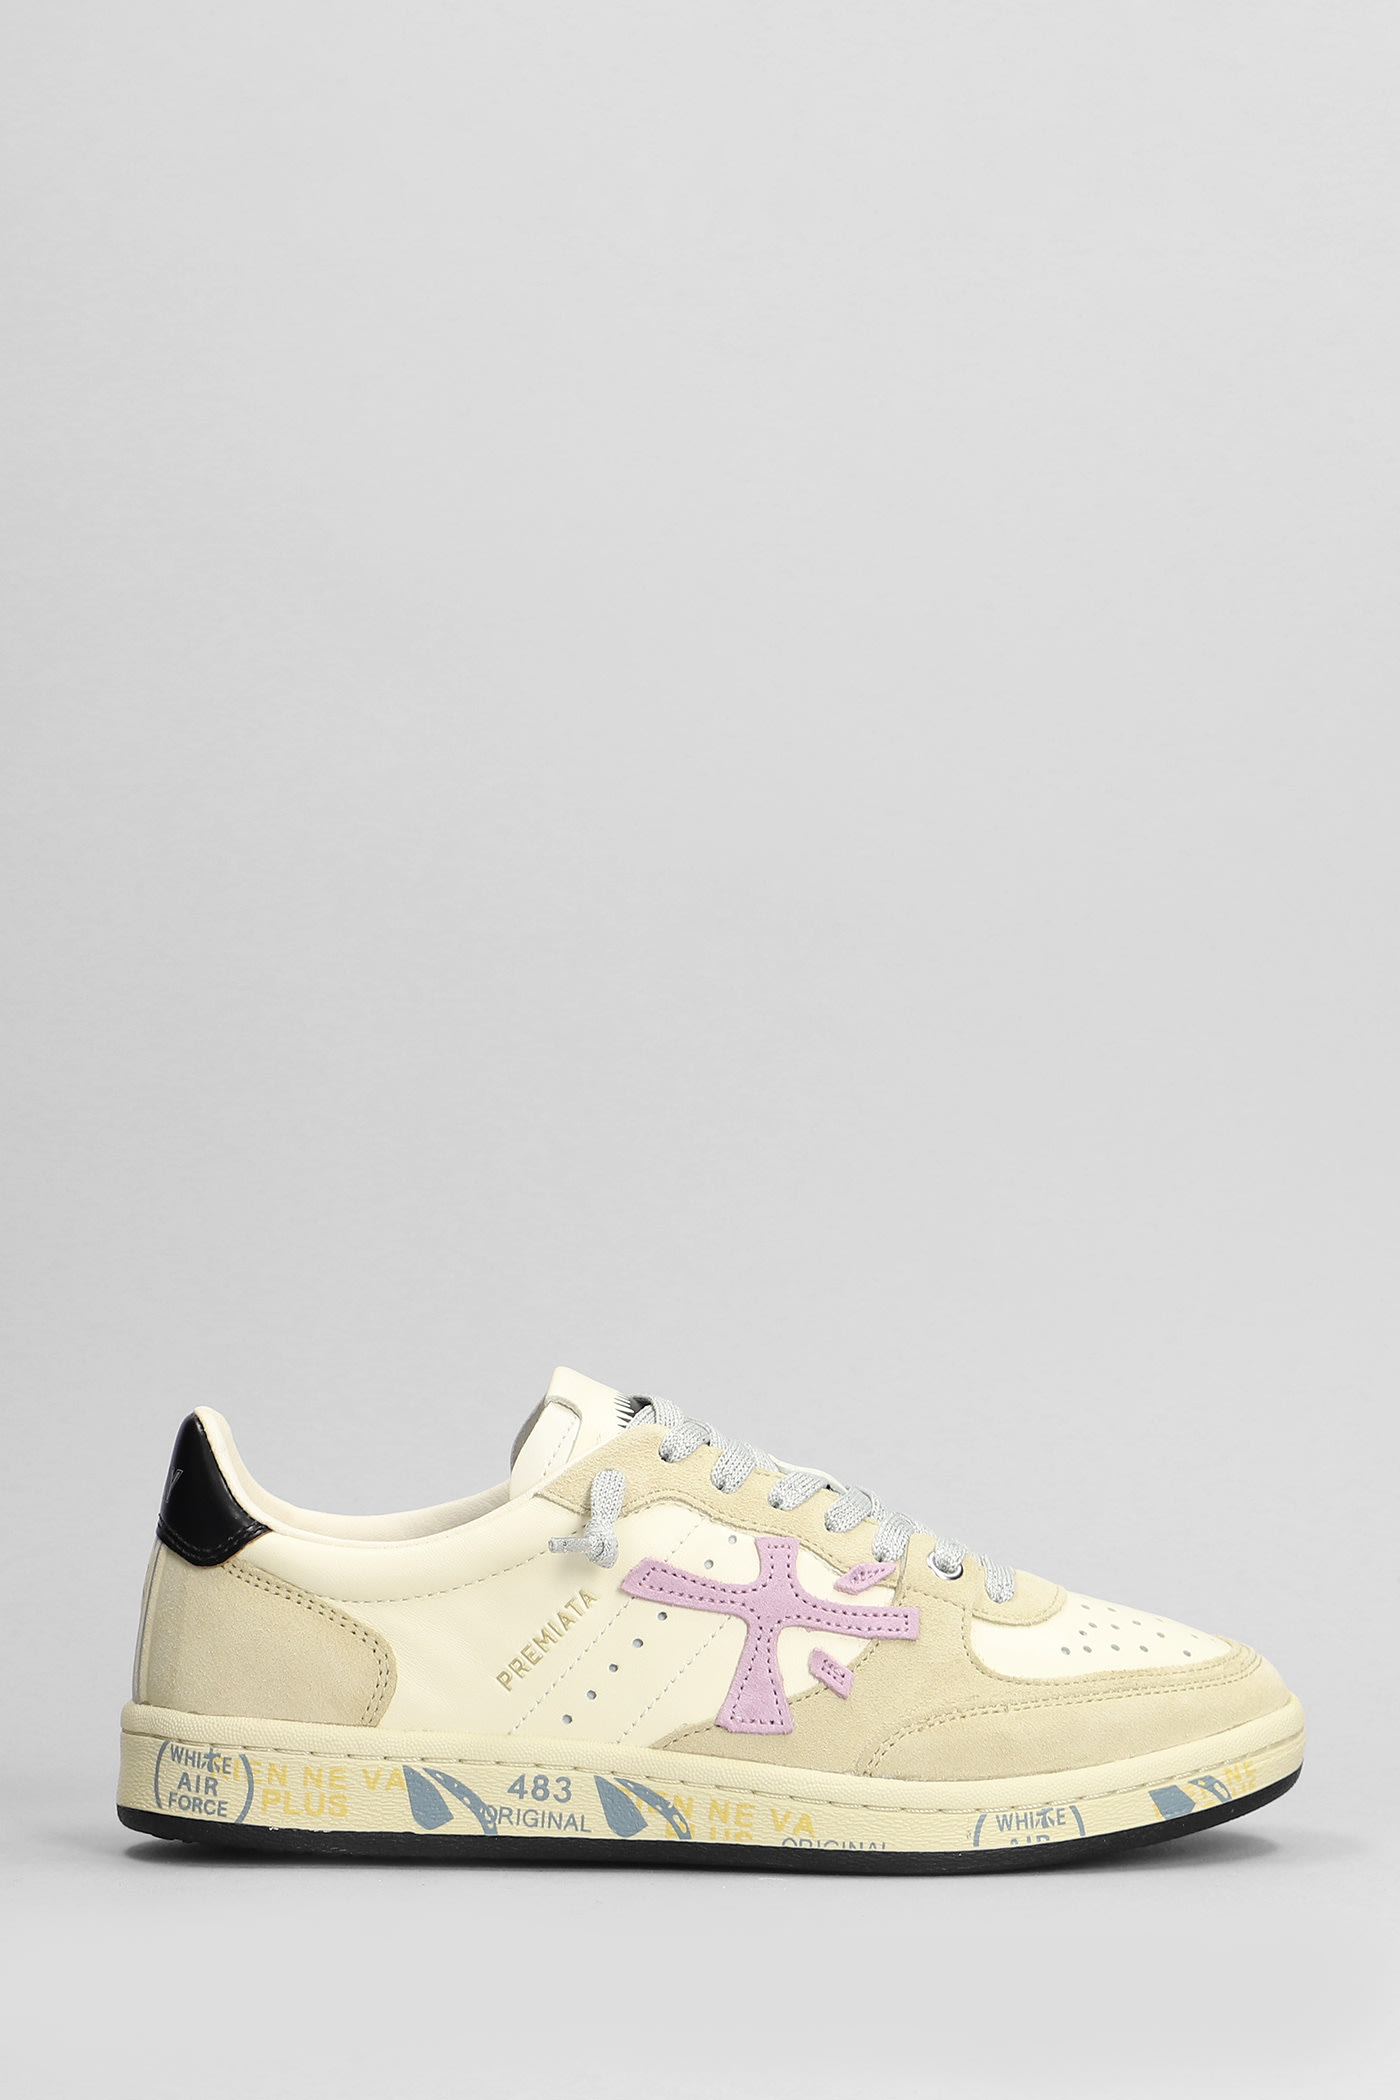 Premiata Bskt Clay Sneakers In Beige Suede And Leather